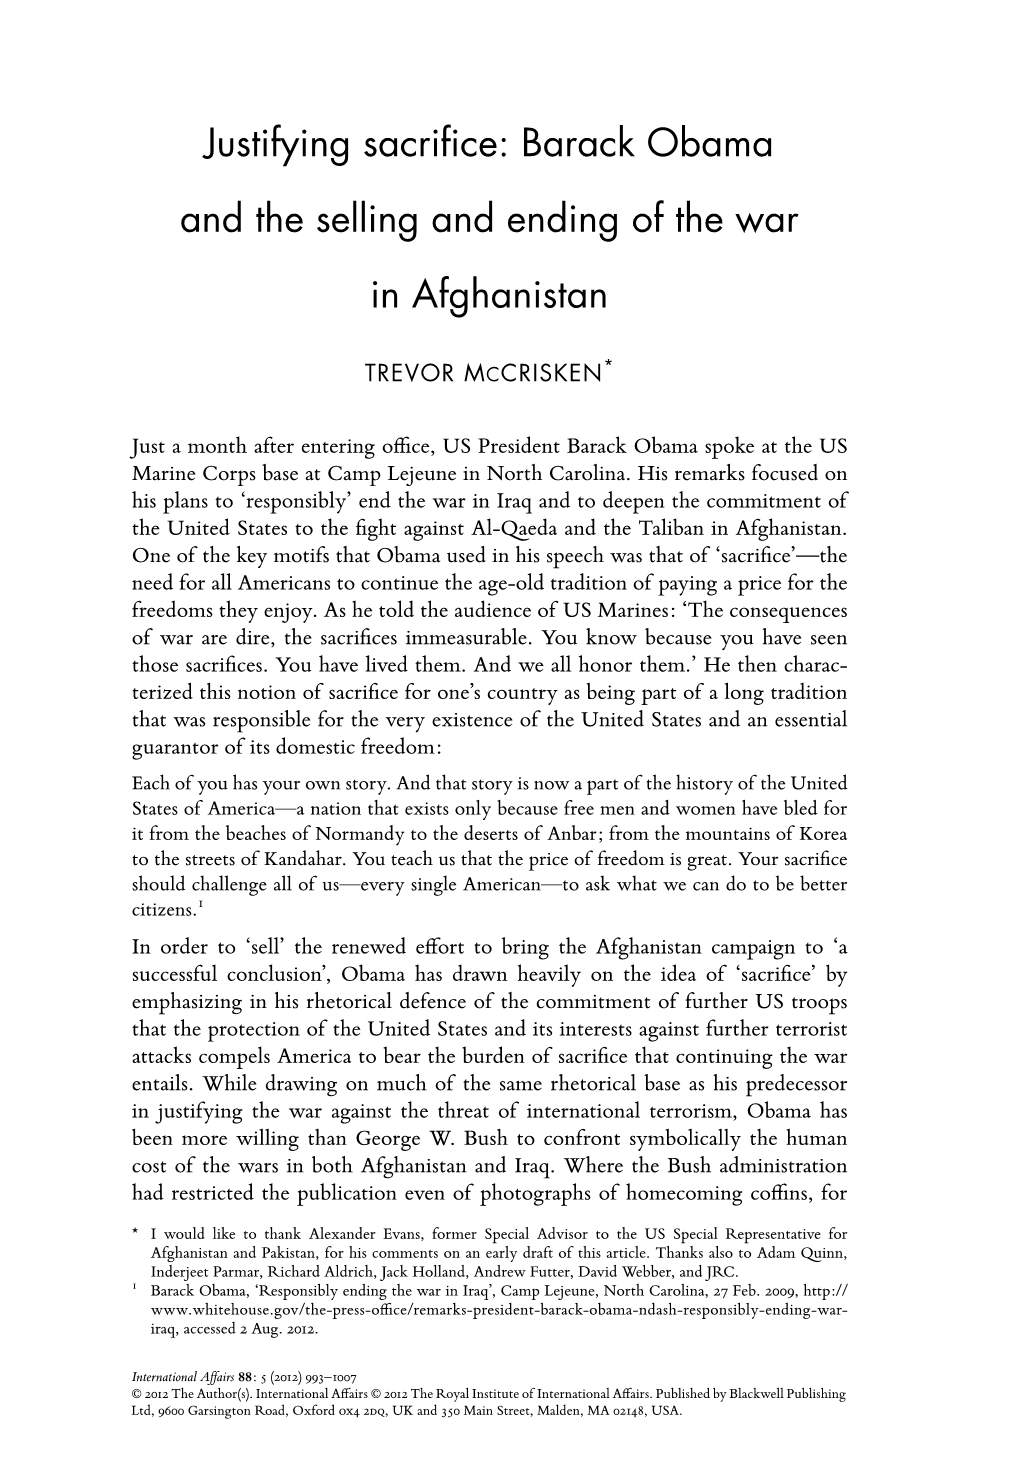 Justifying Sacrifice: Barack Obama and the Selling and Ending of the War in Afghanistan